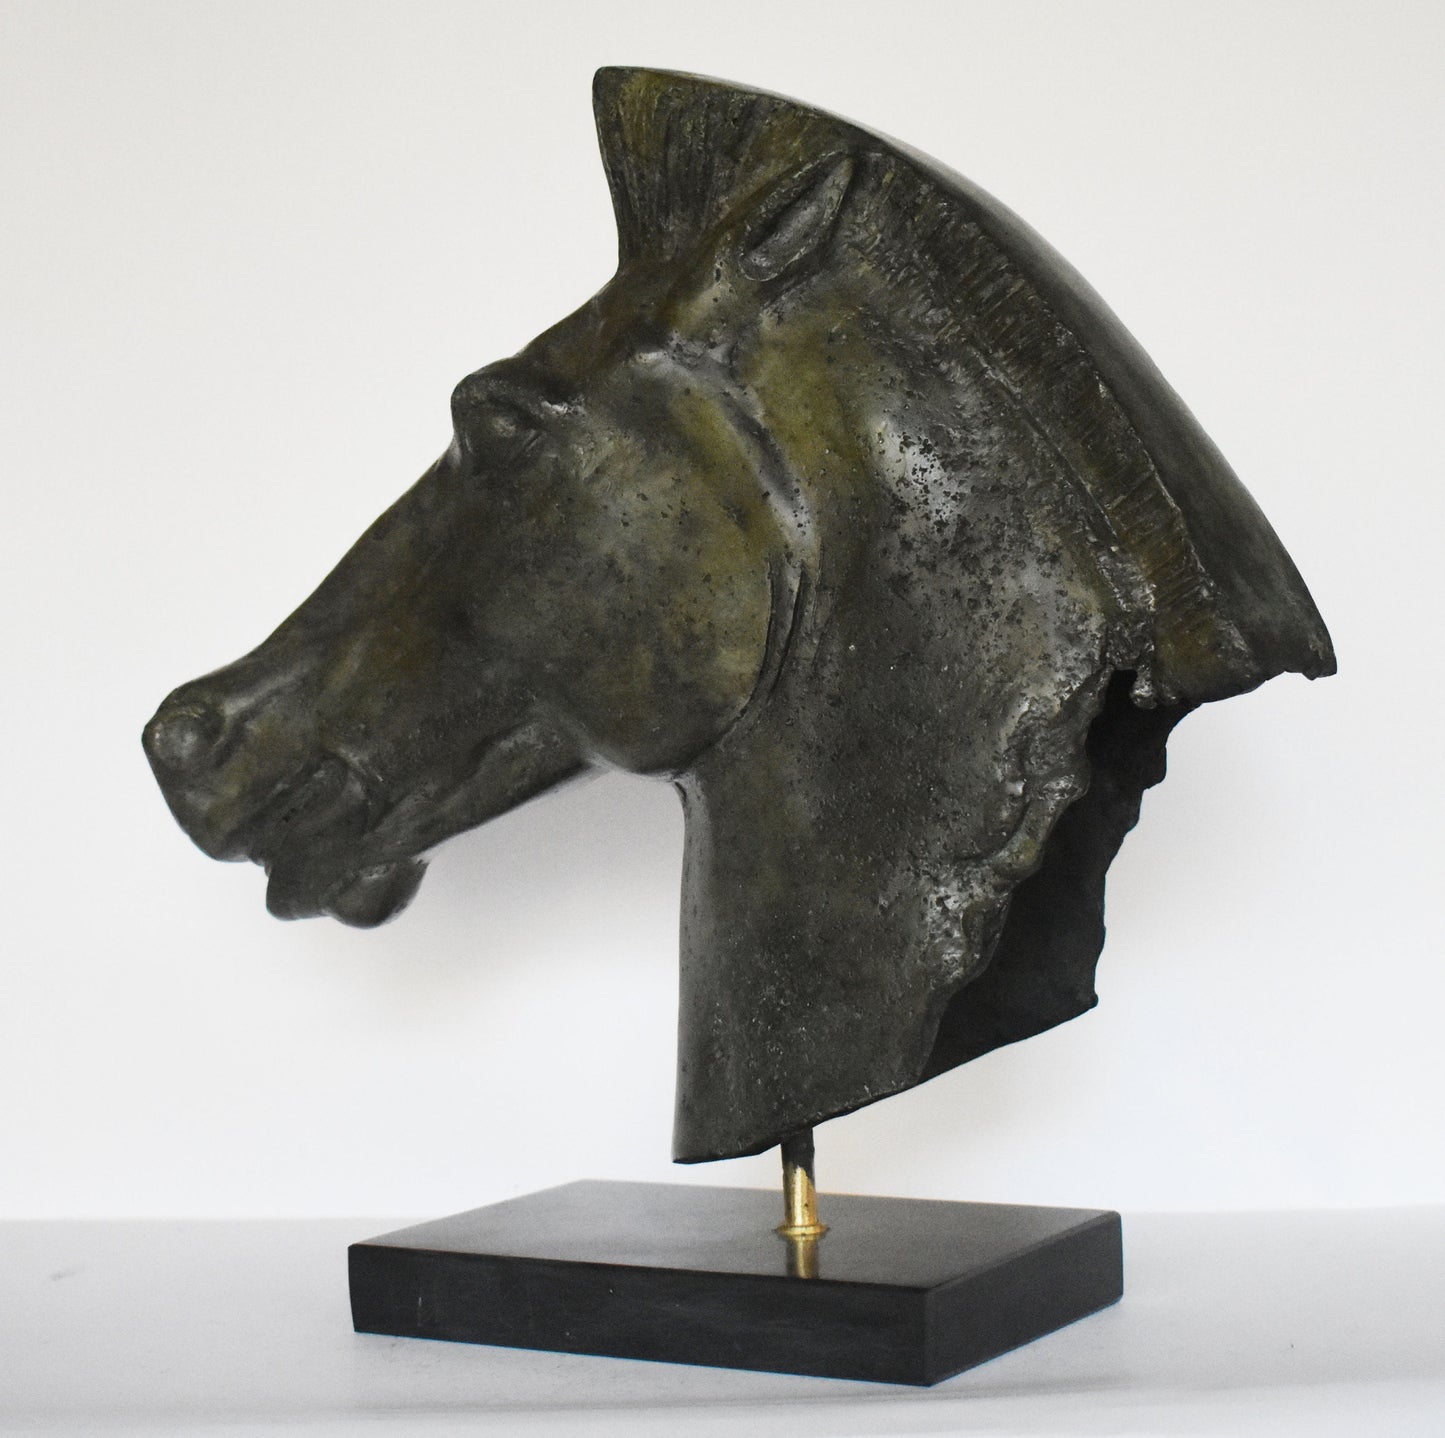 Ancient Greek Horse head with marble base - pure Bronze Sculpture - Symbol of Wealth and Prosperity - Perfect Gift